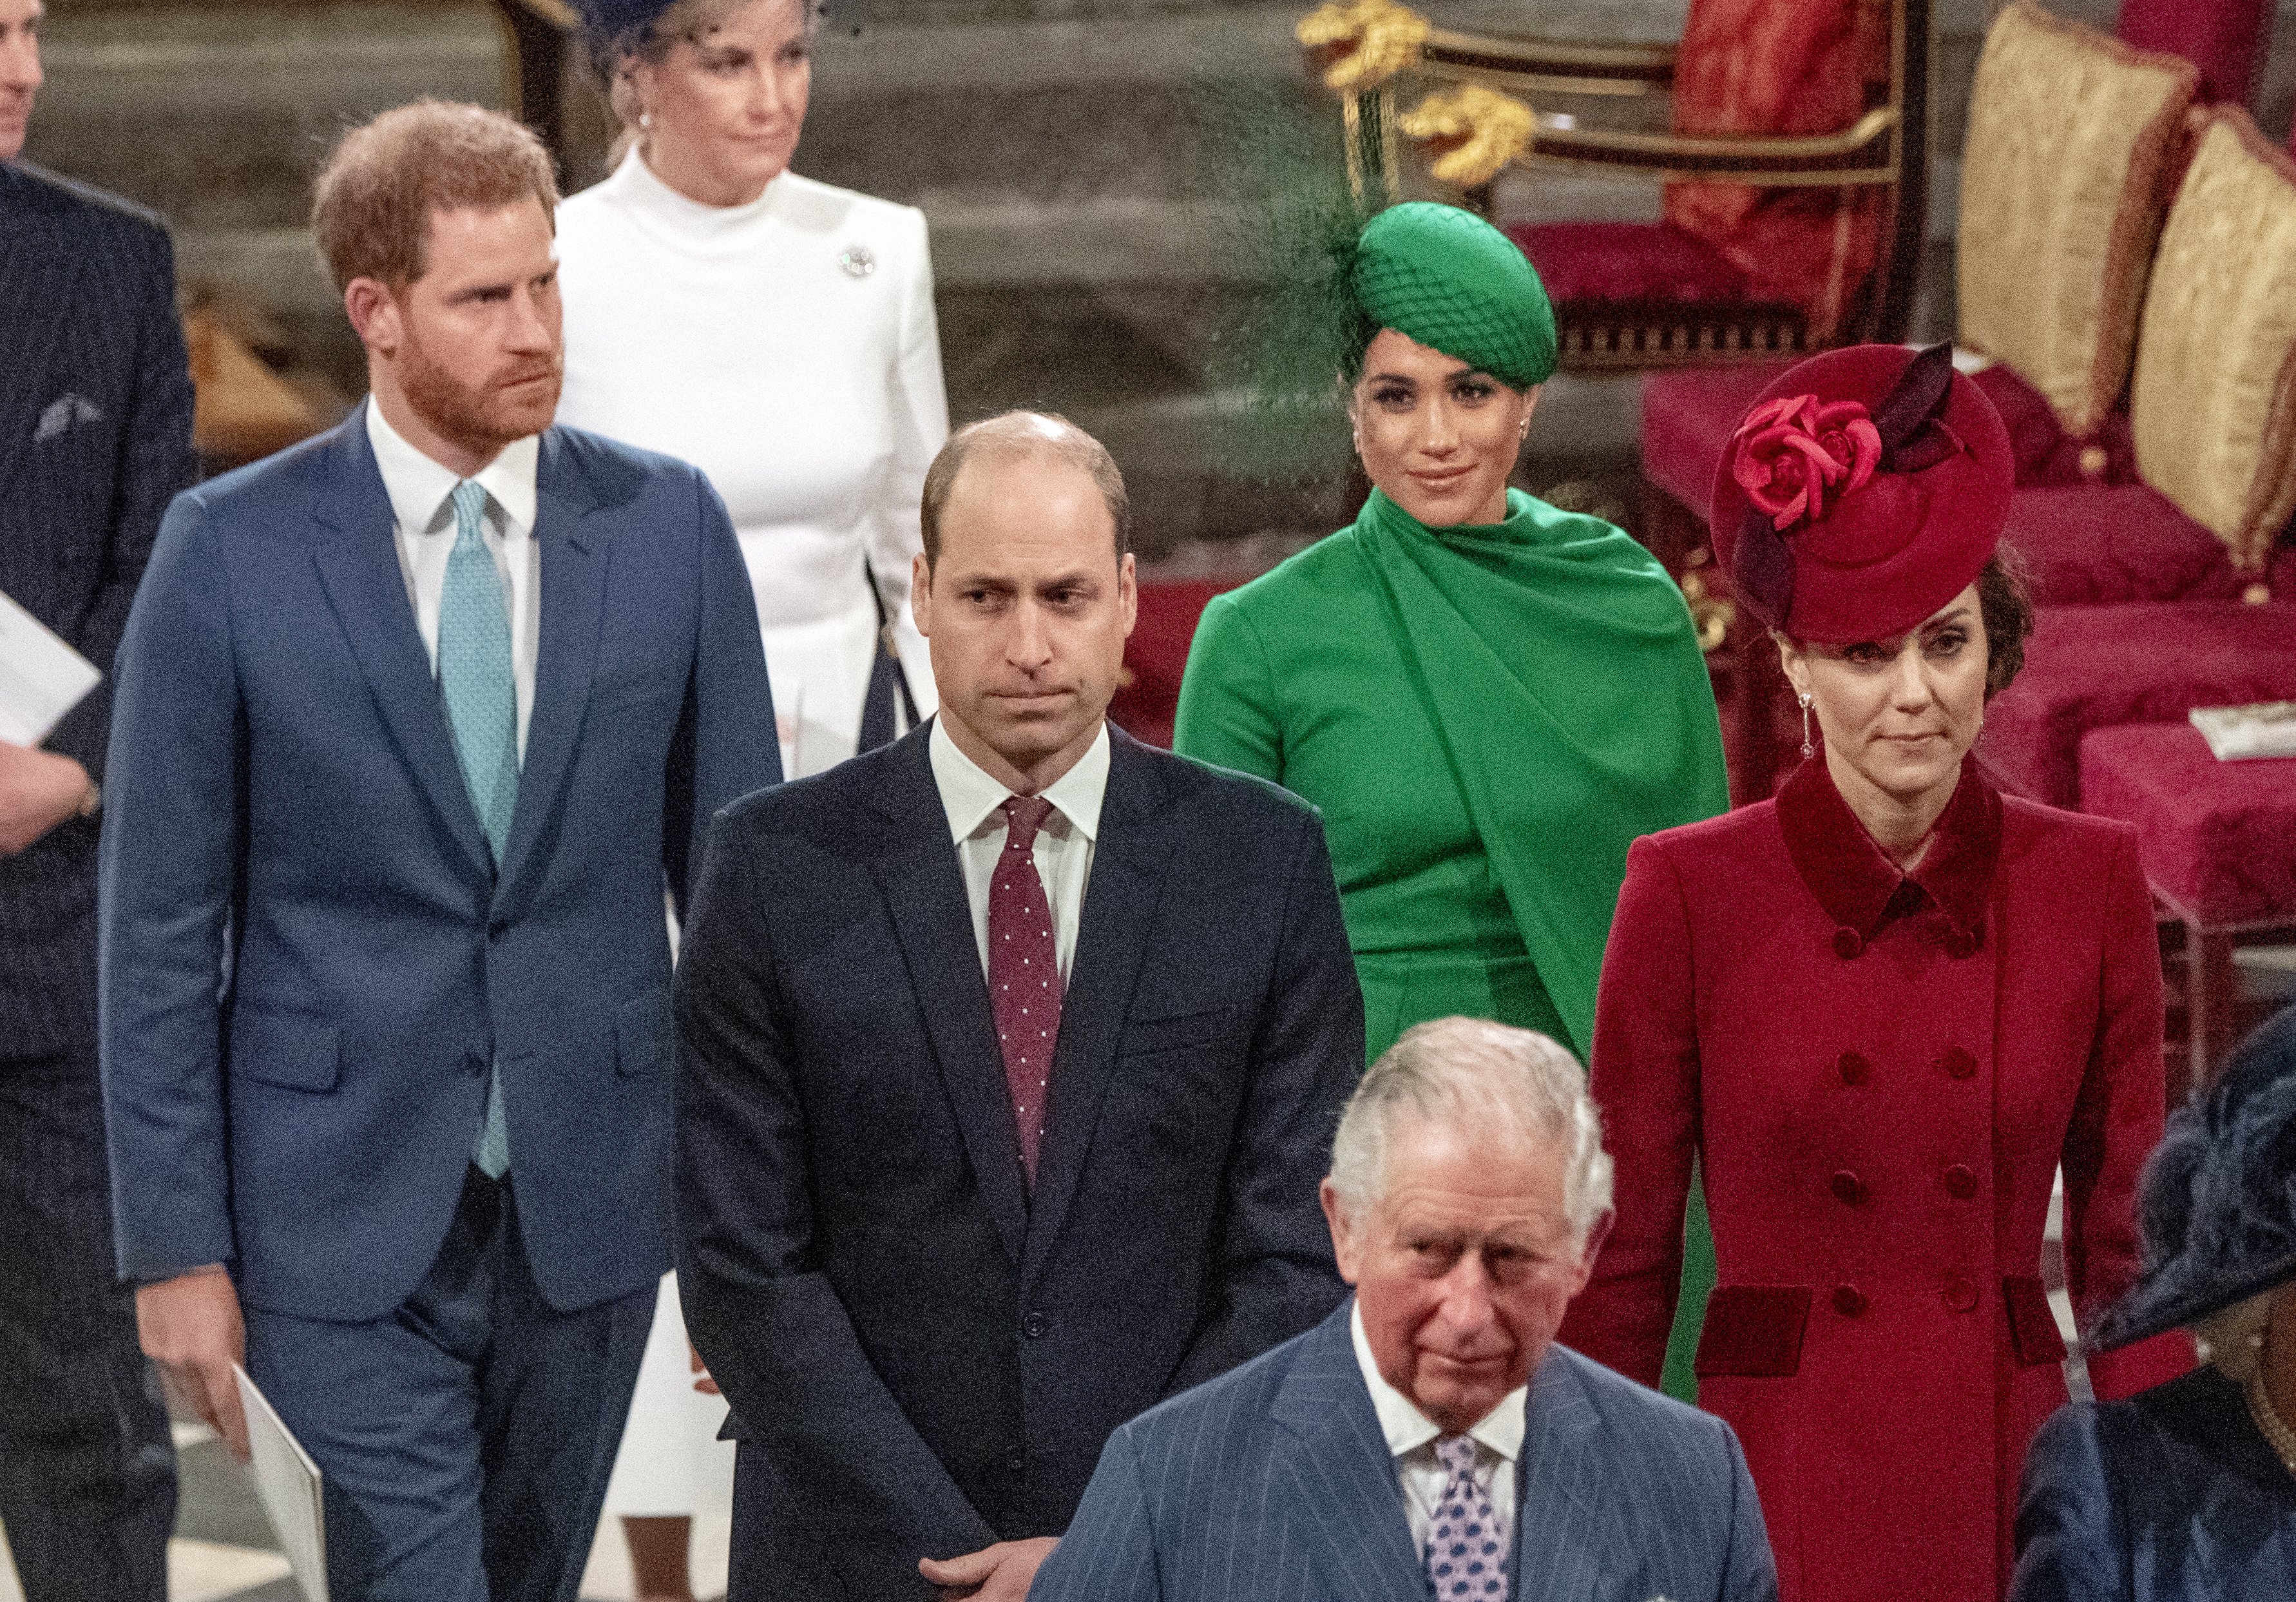 Prince Harry, Duchess Meghan, Prince William, Duchess Kate, and Prince Charles at the Commonwealth Day Service on March 9, 2020, in London, England. | Source: Getty Images